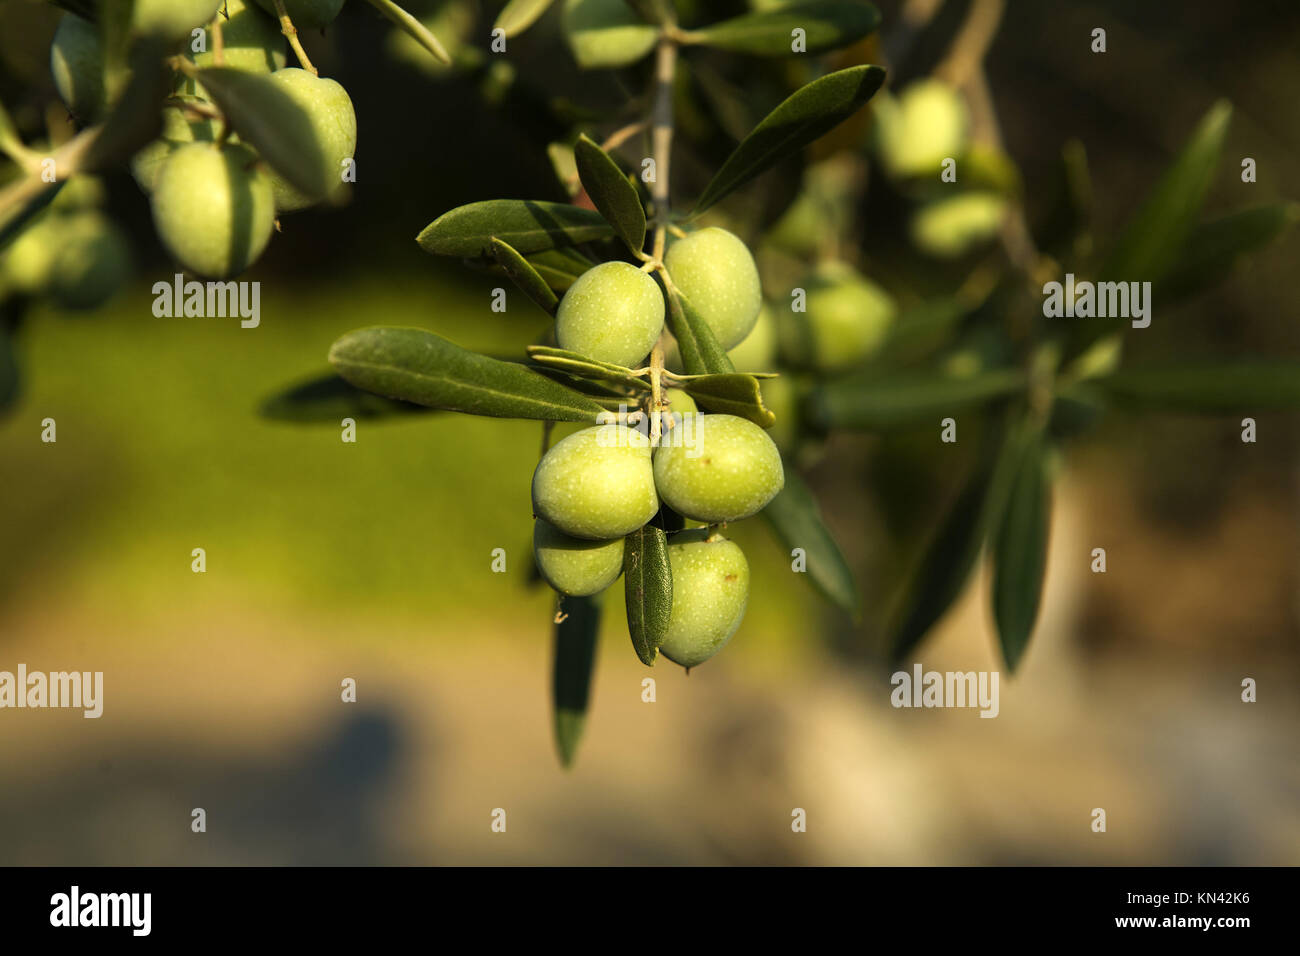 Olive branch with some unripe green olives grown in Extremadura, Spain. Stock Photo